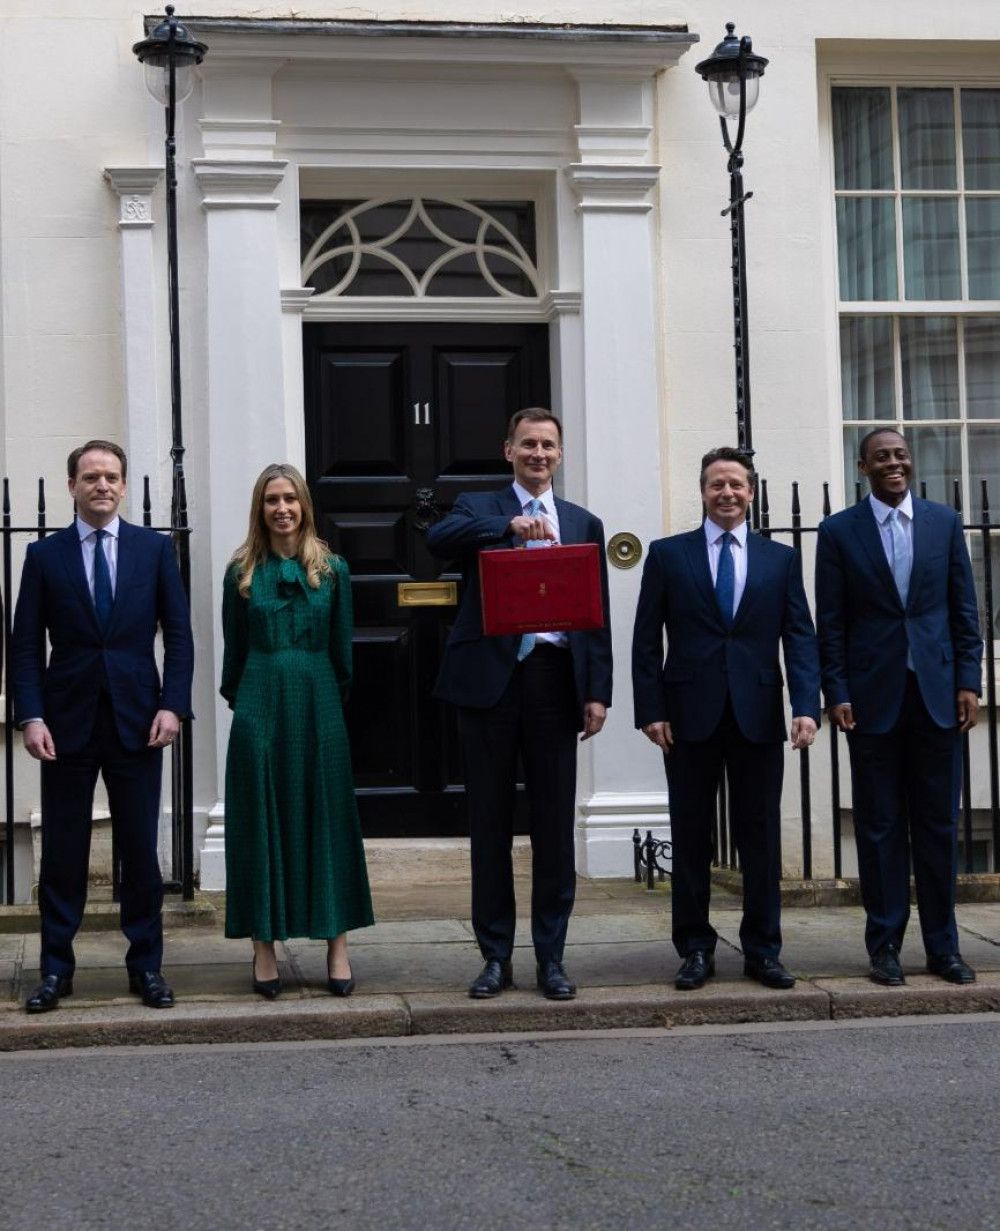 Read on for what the Hitchin MP had to say about Jeremy Hunt's budget. PICTURE: From the left, Nigel Huddleston MP, Laura Trott MP, Chancellor Jeremy Hunt, Bim Afolami MP 